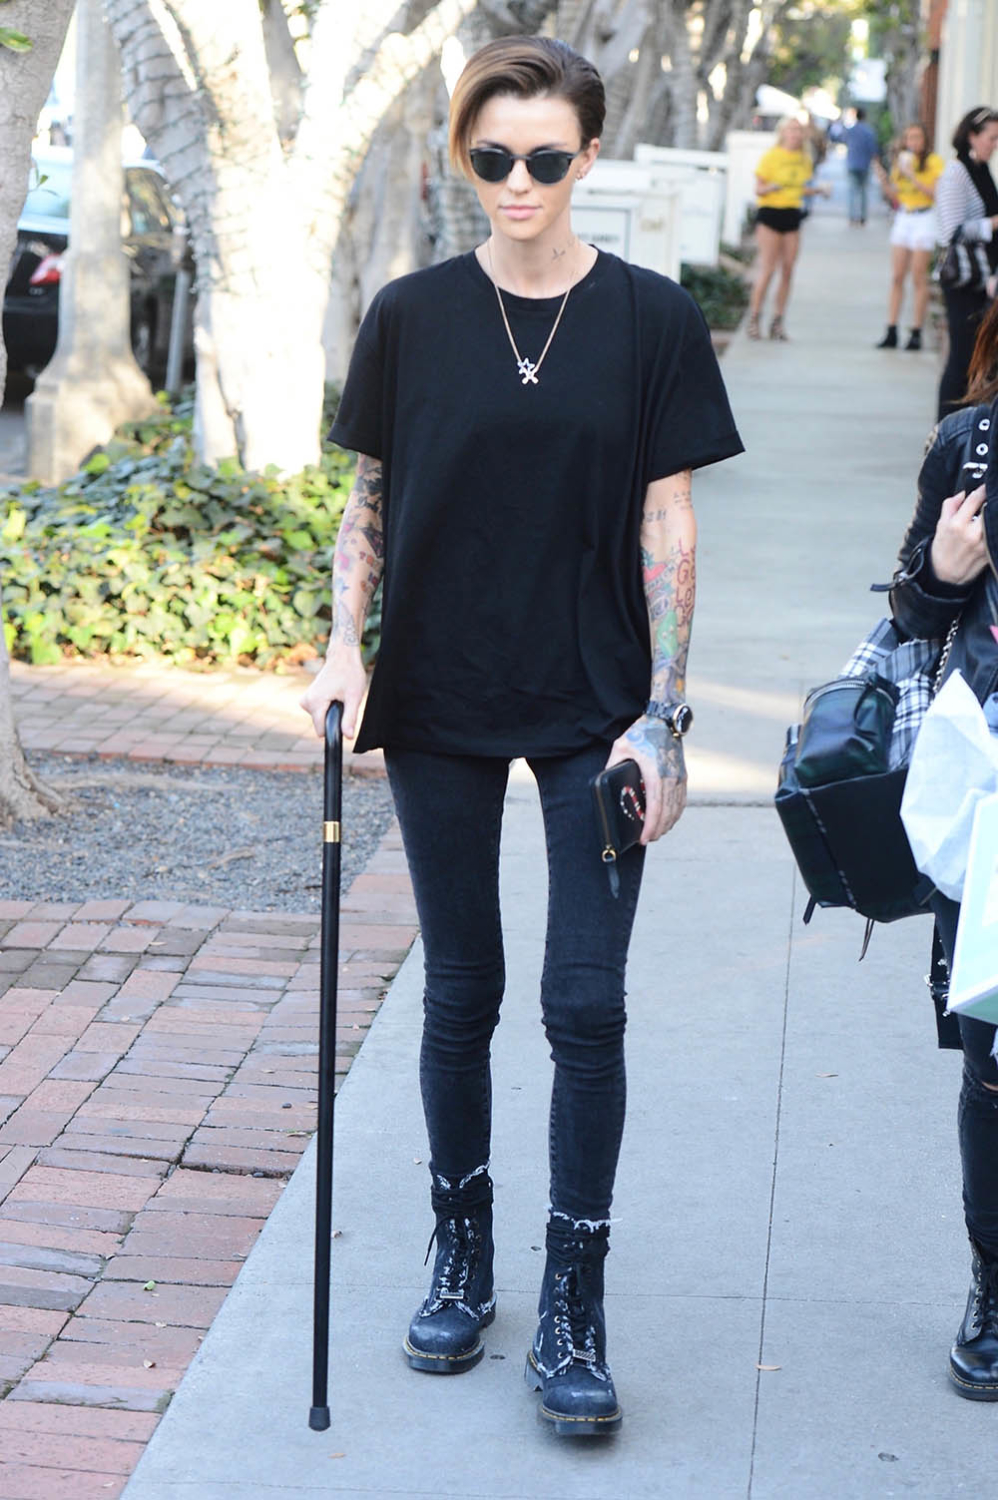 Ruby Rose leaves Kate Somerville Spa in West Hollywood